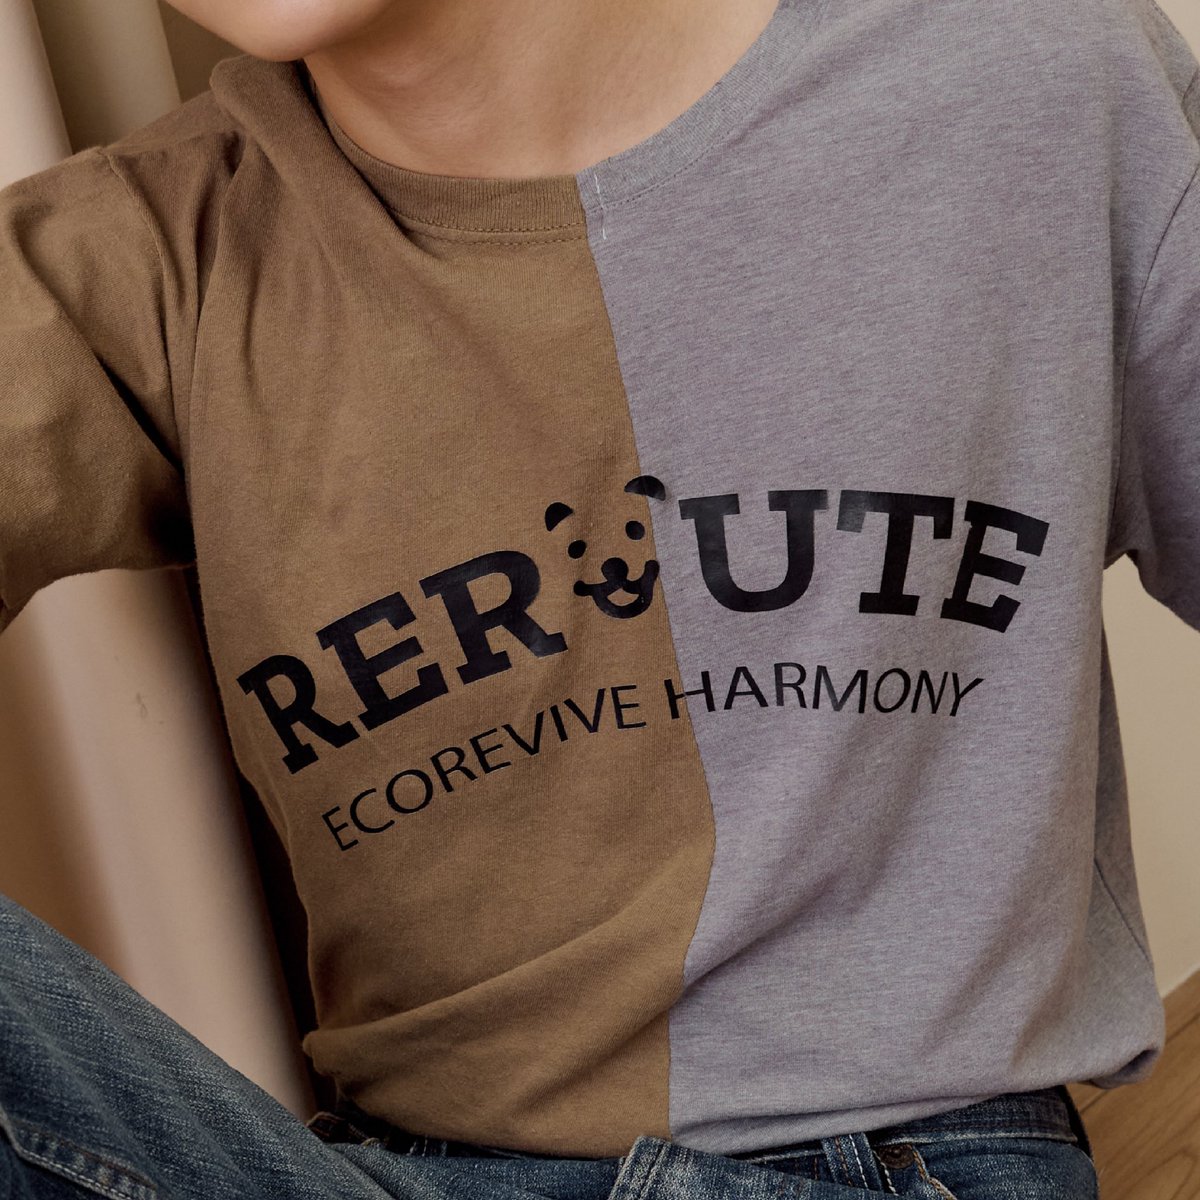 Step into sustainability with style! Our Half T-shirt combines eco-consciousness with trendy design. #Reroute #WearTheWorld #Rerouteofficial #EcoreviveHarmony